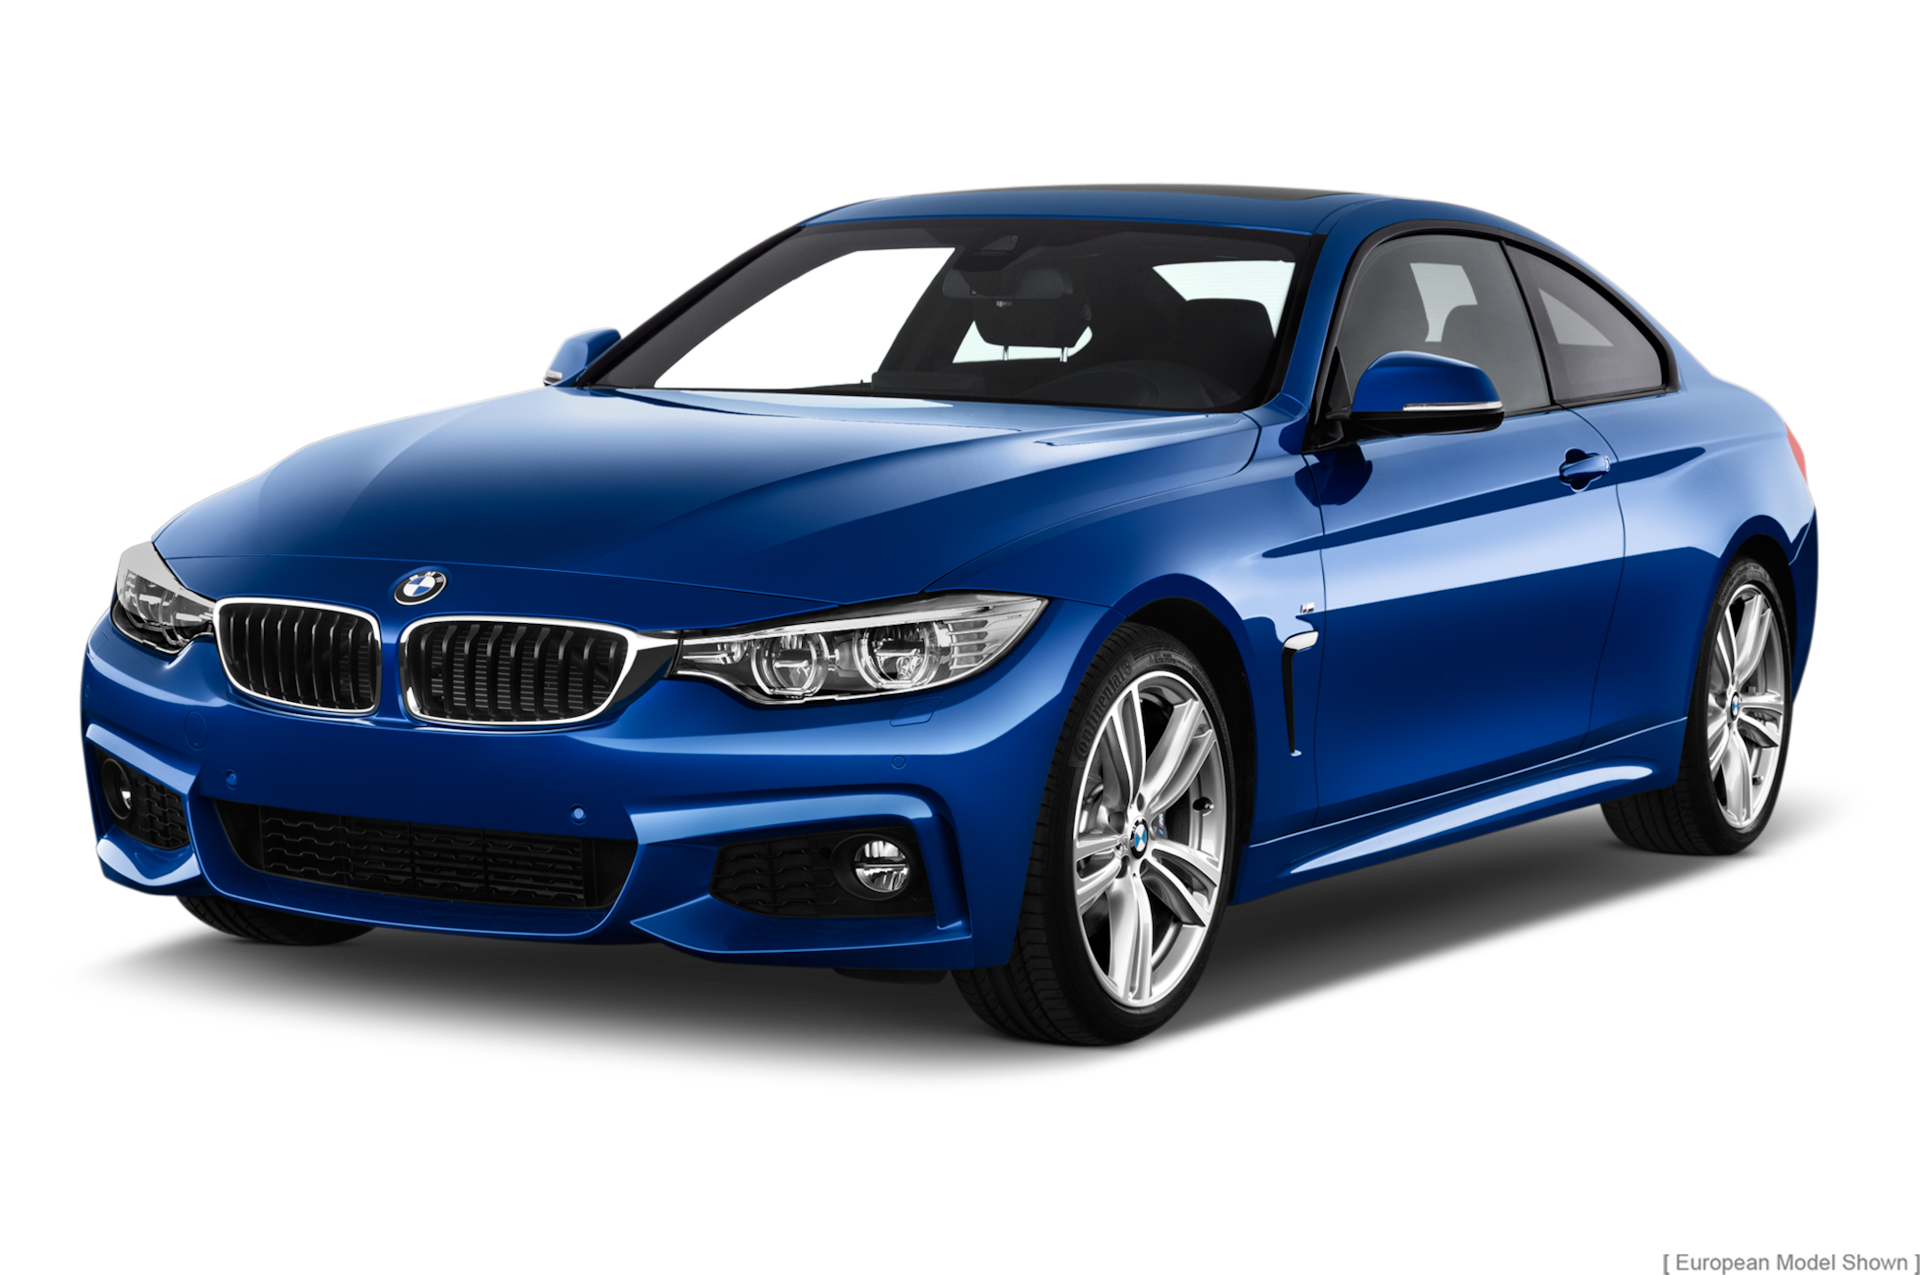 2014 BMW 4-Series Prices, Reviews, and Photos - MotorTrend